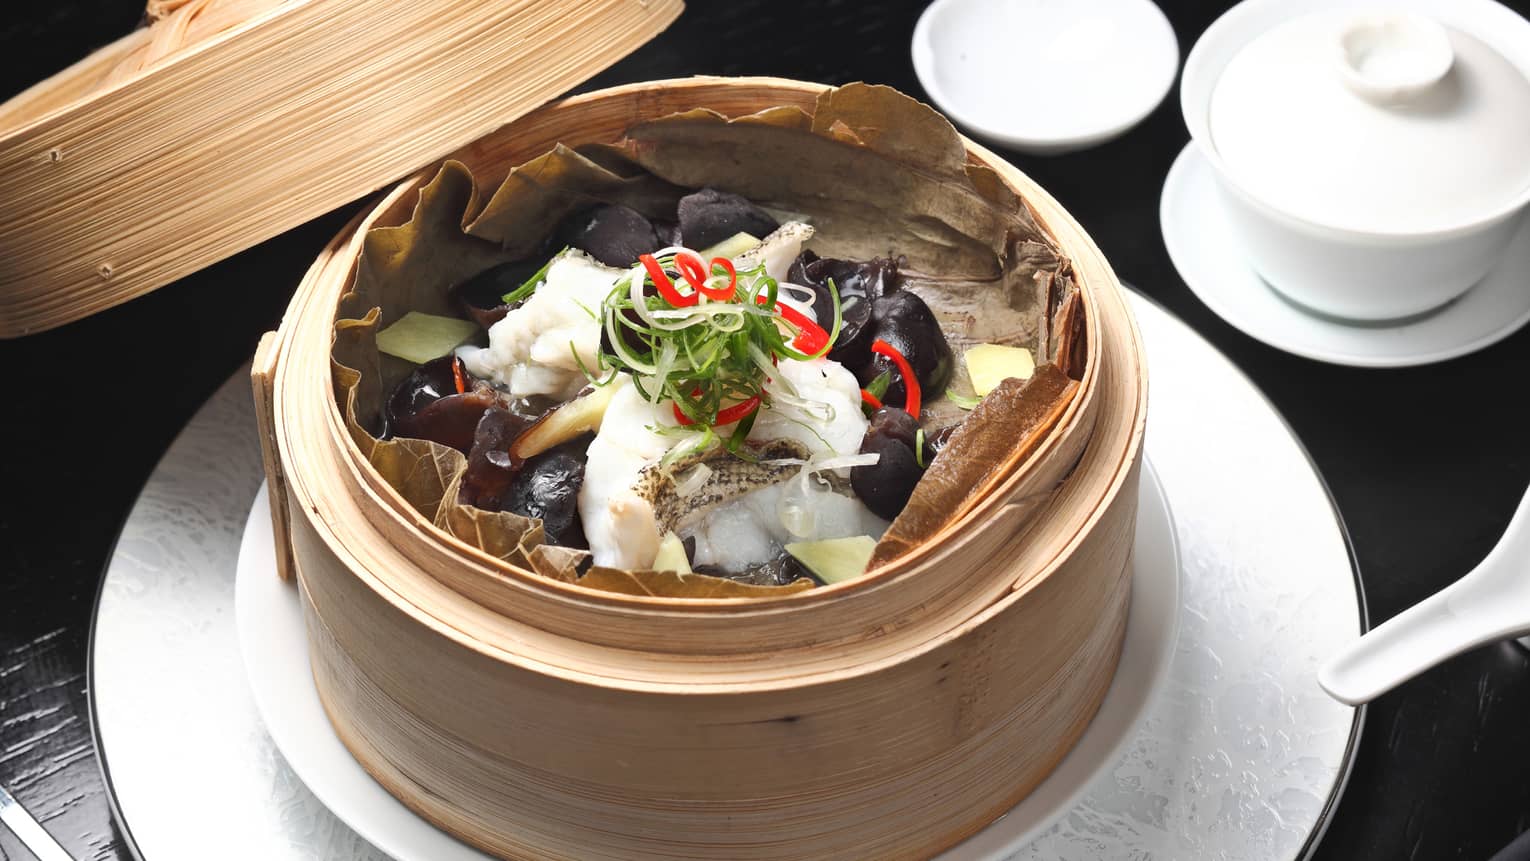 Bamboo steam basket with seafood, vegetables on white plate